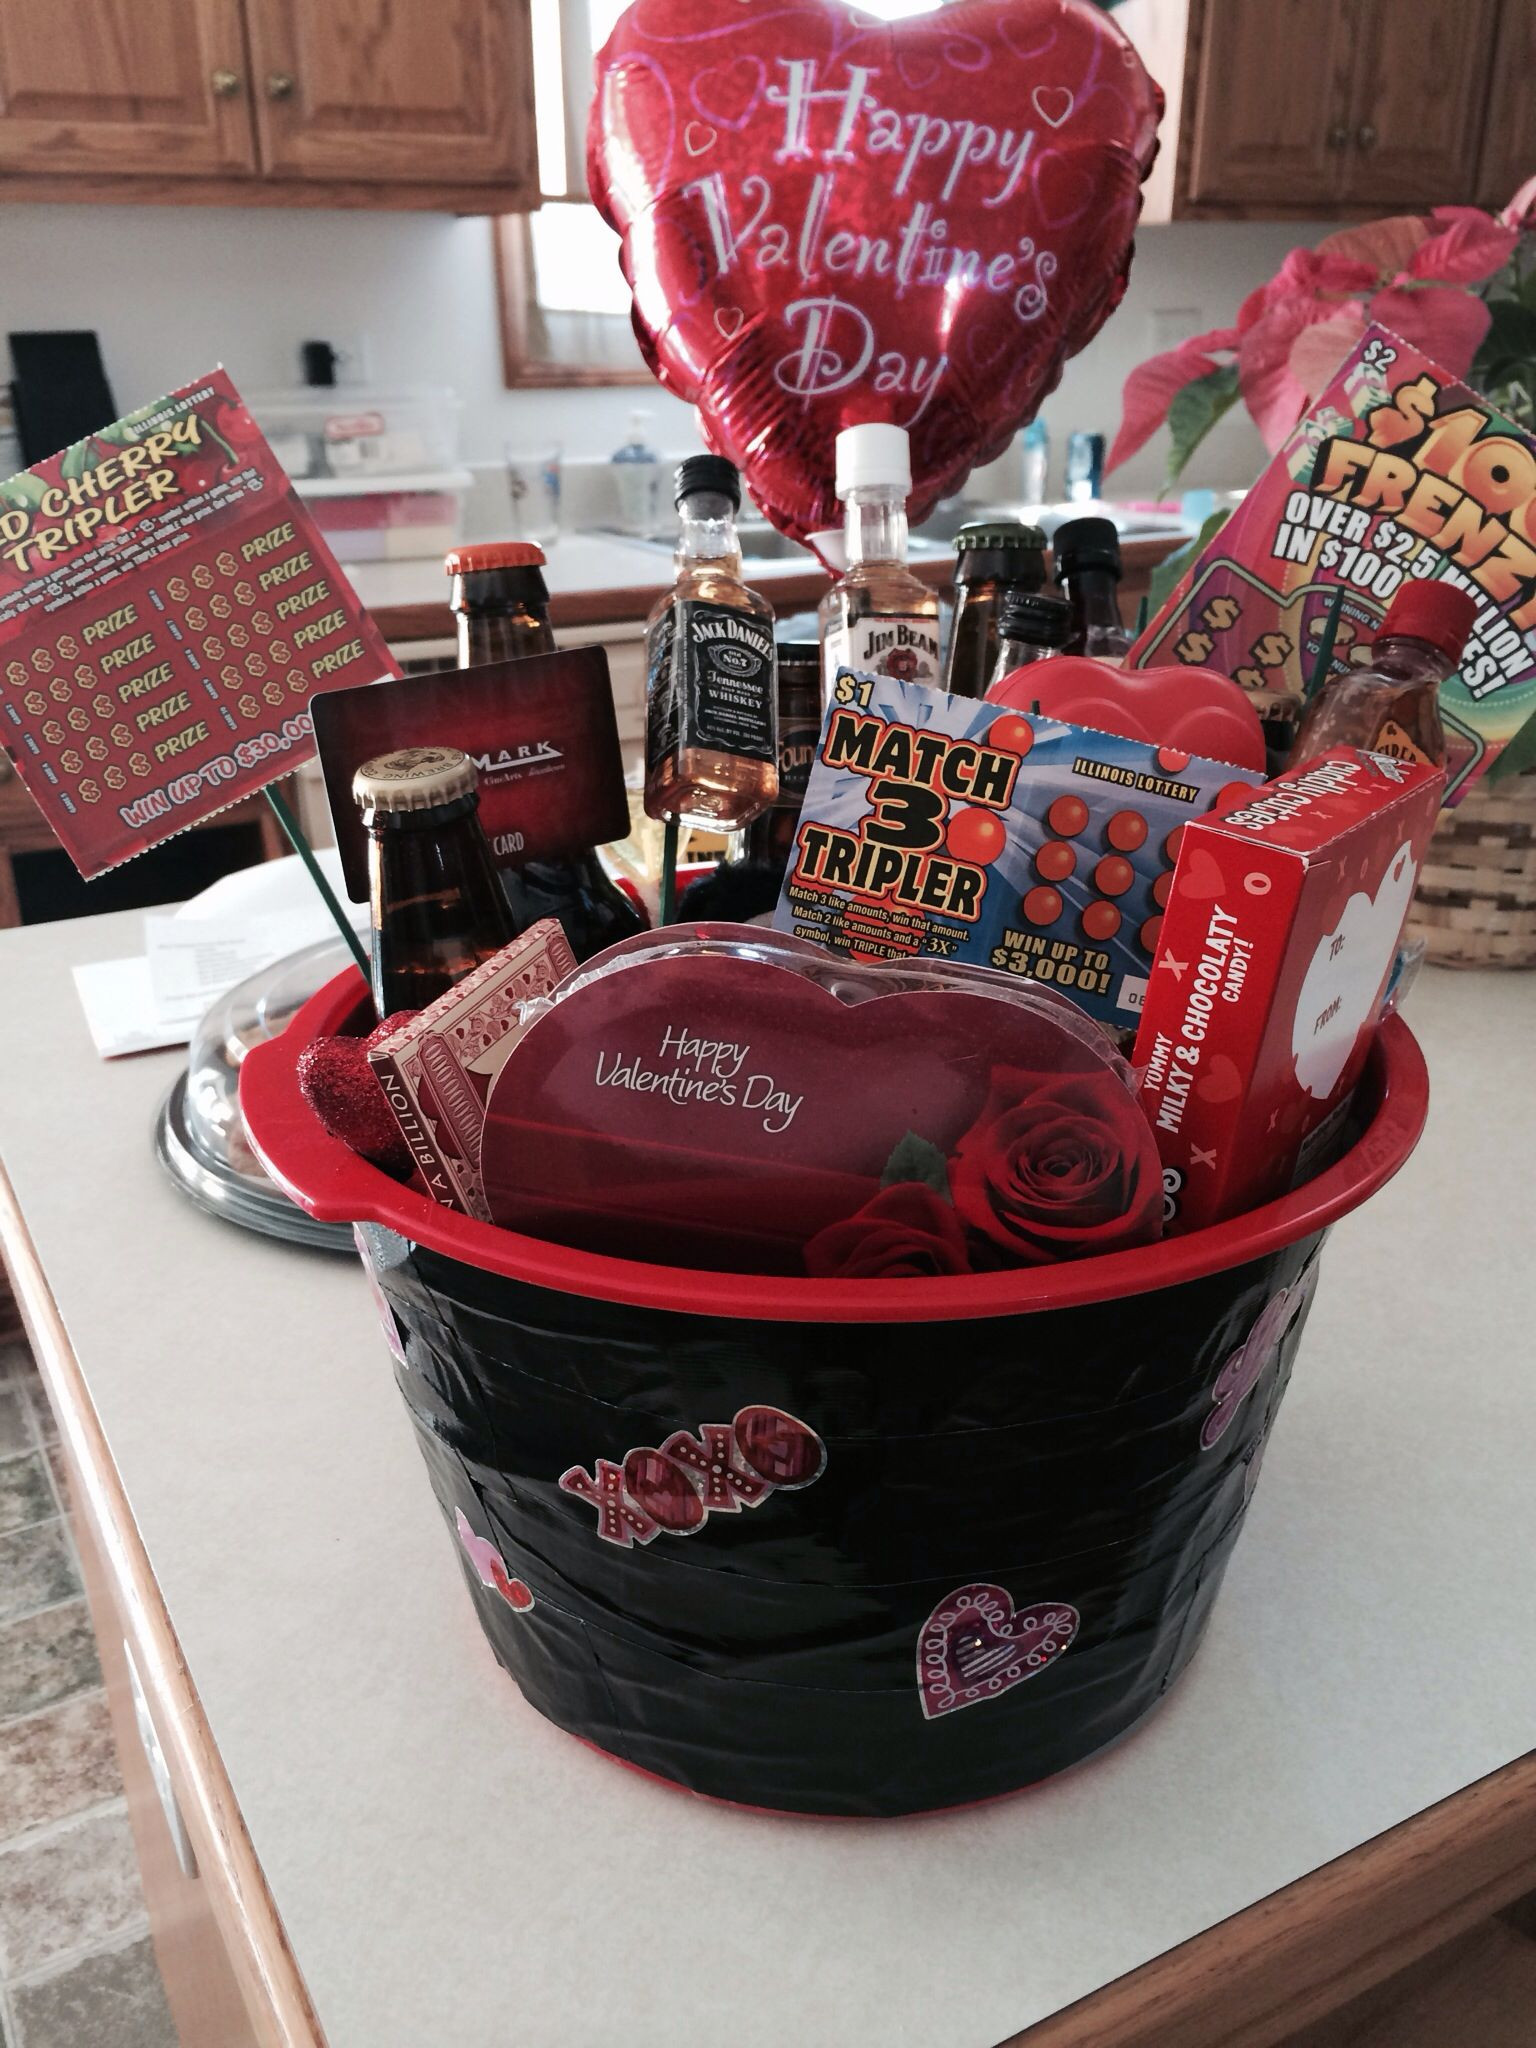 Valentines Gift Basket Ideas For Him
 Valentines day basket for him I used 6 IPA beers